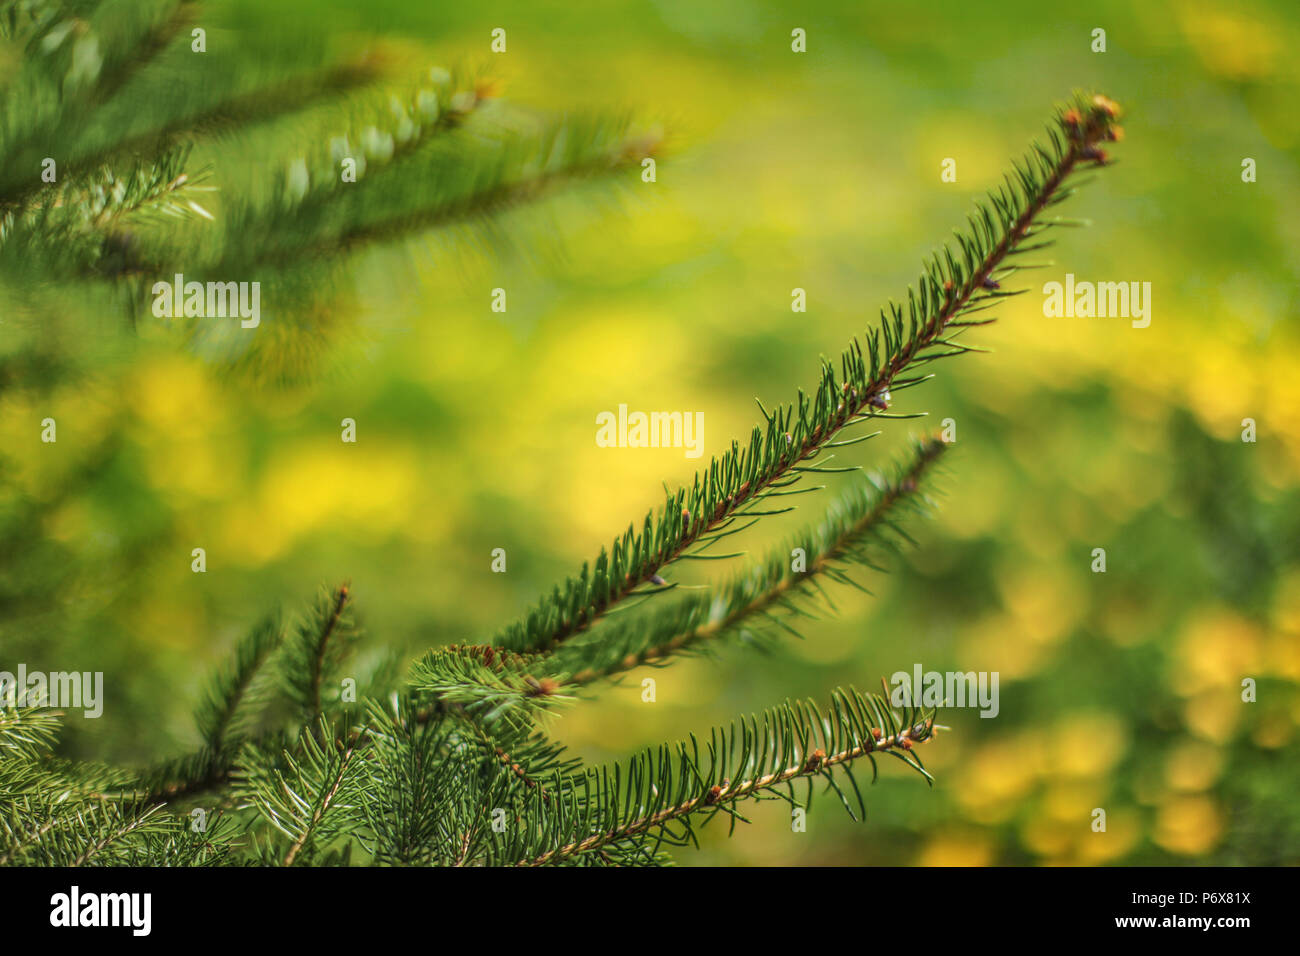 Young branch of pine tree with more coniferous twigs and blurred meadow full of yellow dandelion in background. Stock Photo